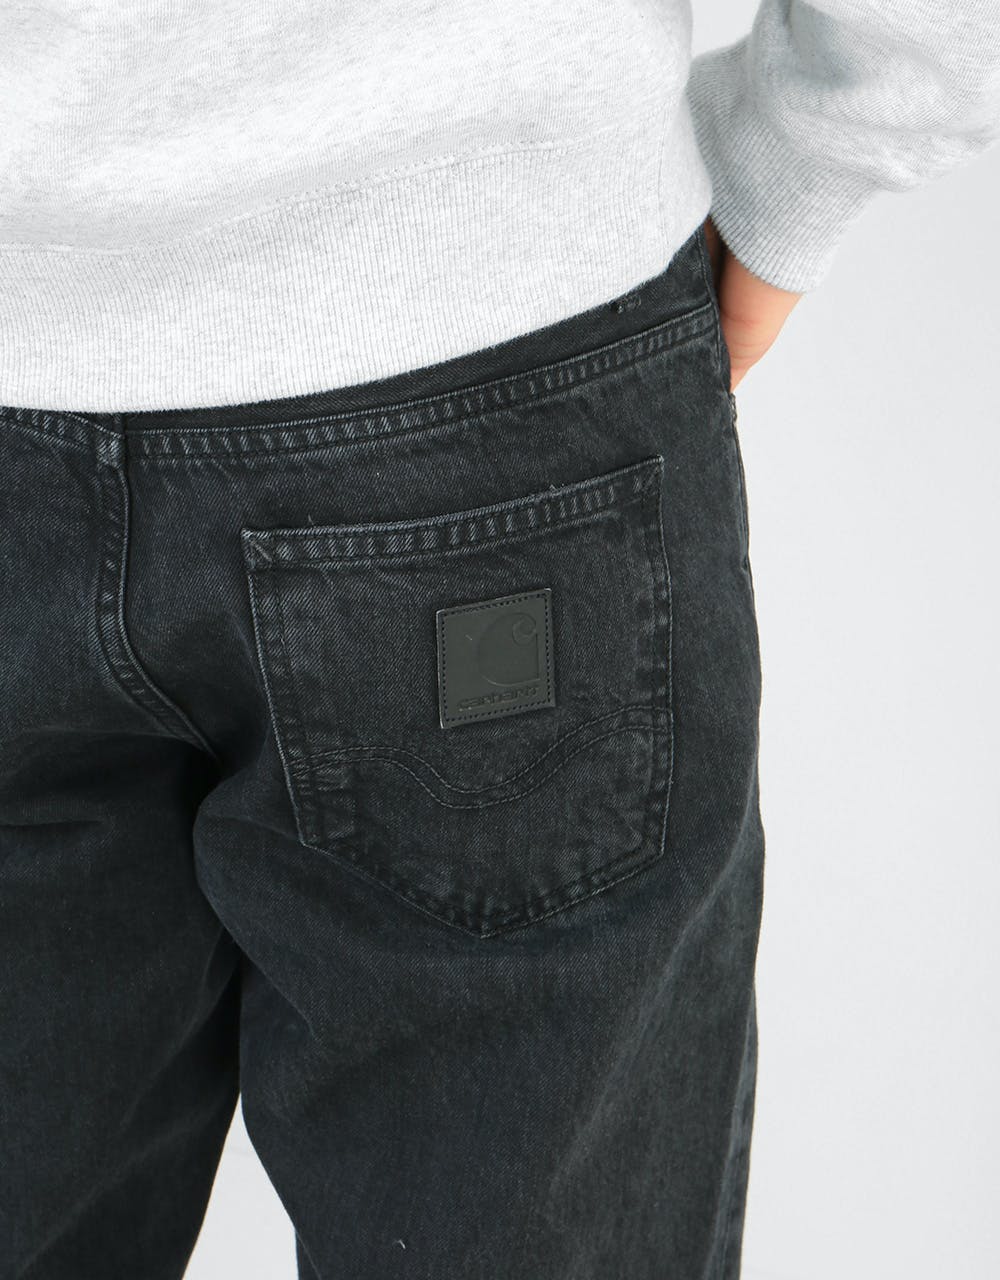 Carhartt WIP Texas Pant - Black (Stone Washed) – Route One